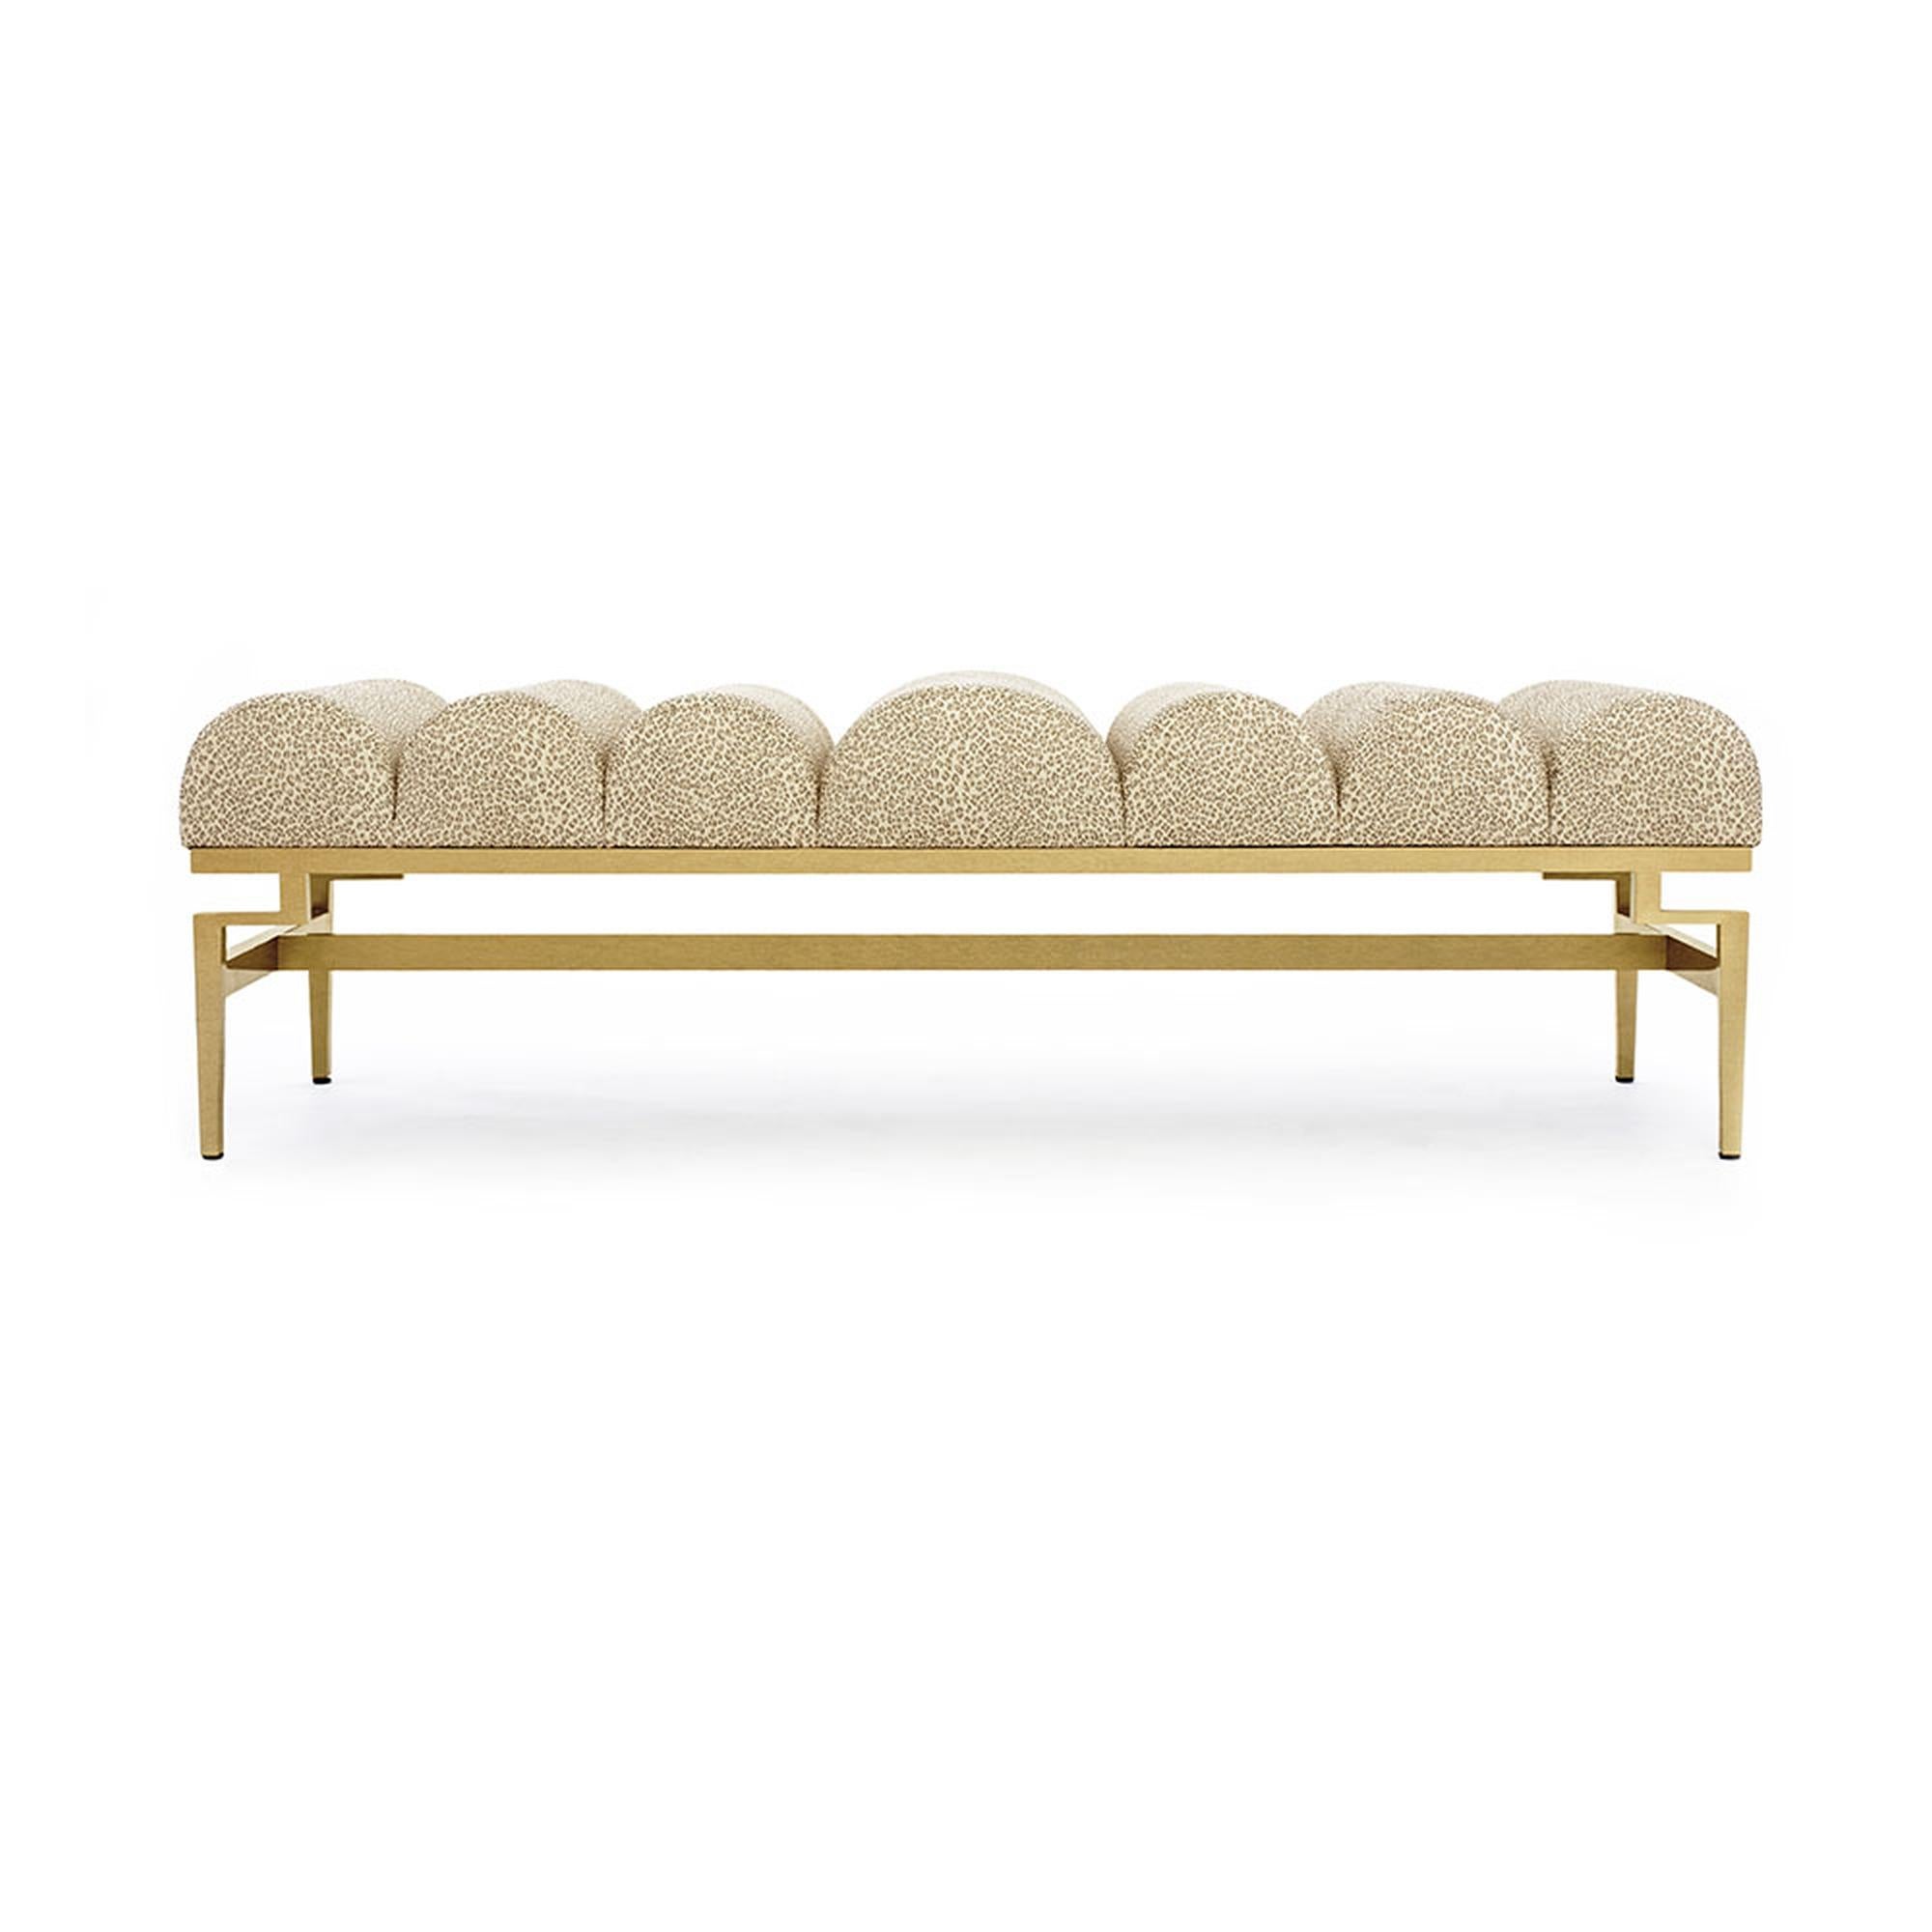 Both functional and visually stunning, the Catalina bed bench is a brilliant accent piece. The careful design and craftsmanship is evident in the uniquely channel tufted seat, where the tufting is largest in the centre, and cascades smaller out to